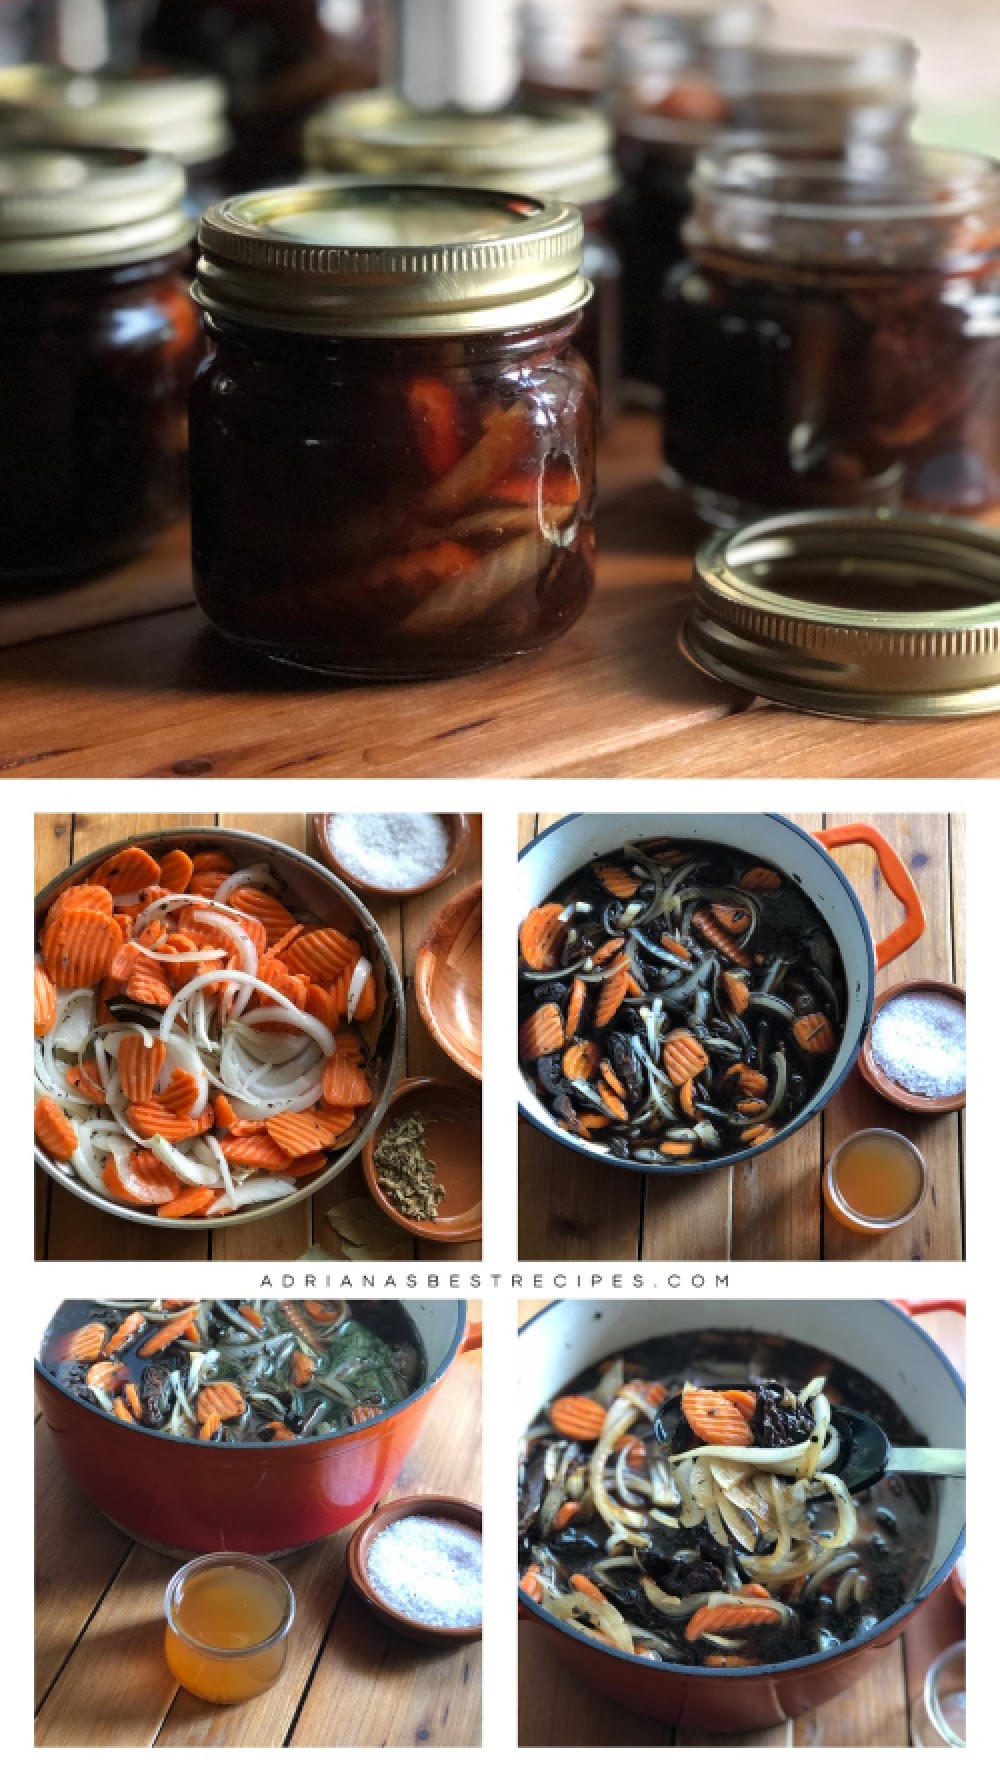 A collage of images showing how to make pickled chipotles